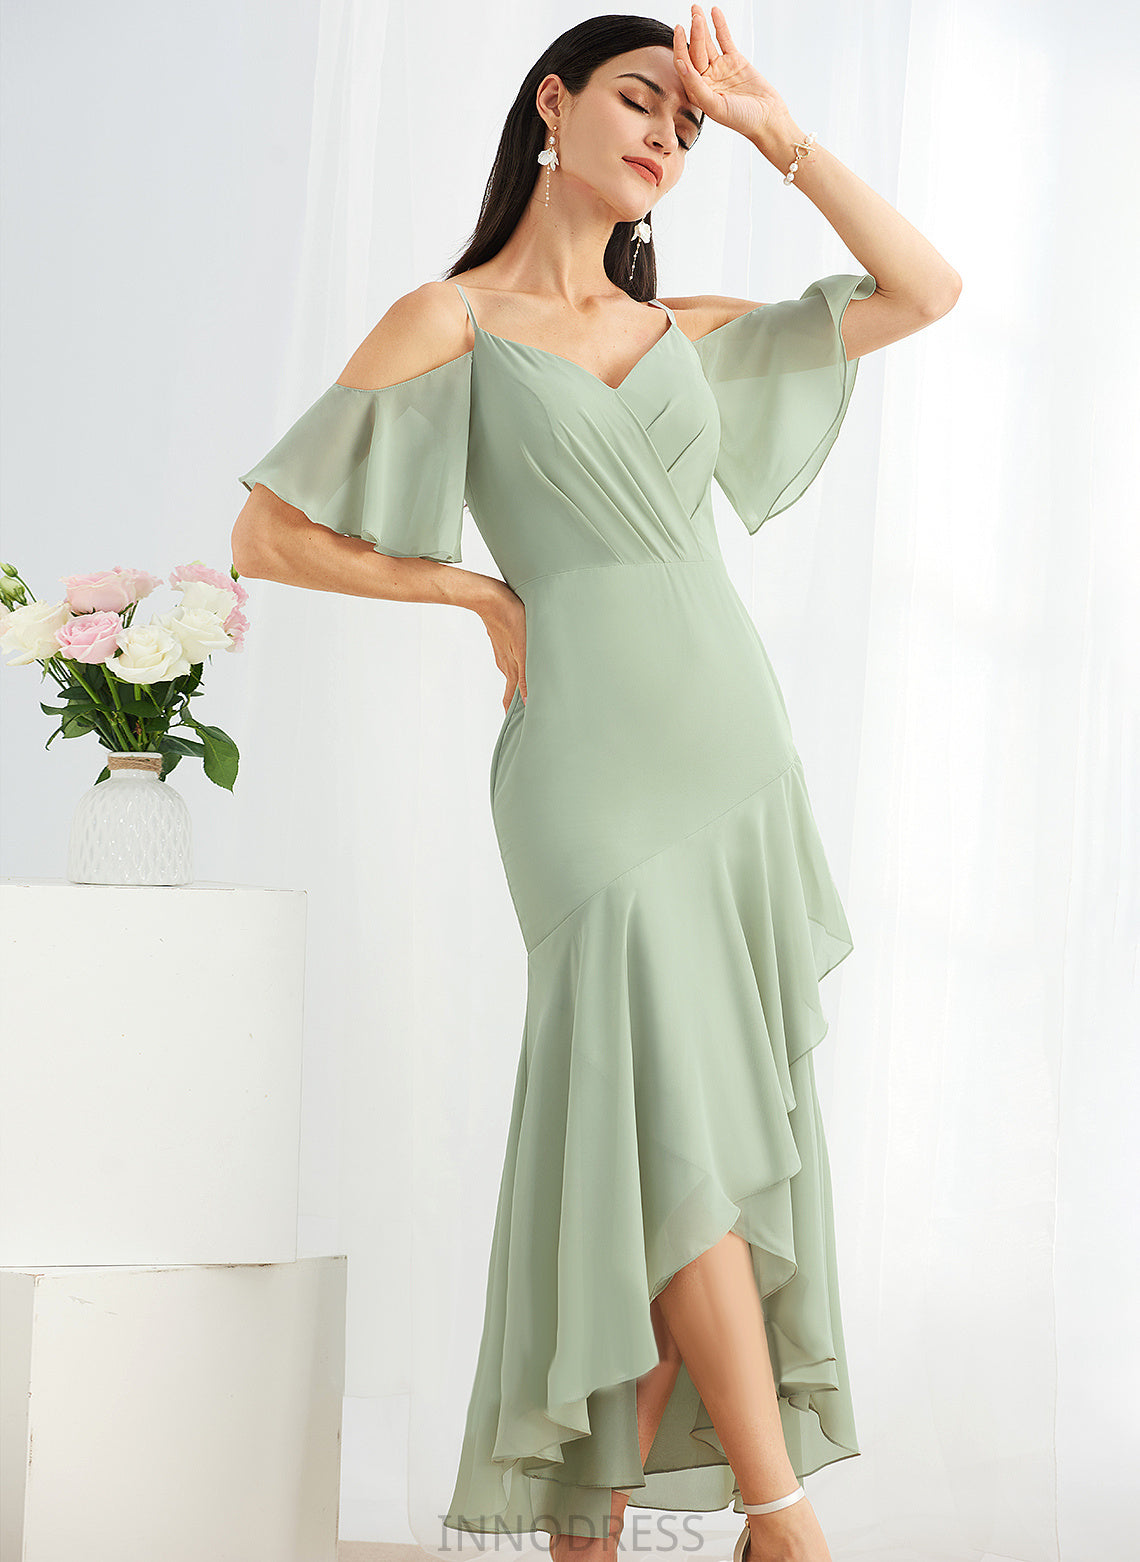 V-neck Ruffle Cocktail Asymmetrical Cocktail Dresses Trumpet/Mermaid Chiffon With Dress Laney